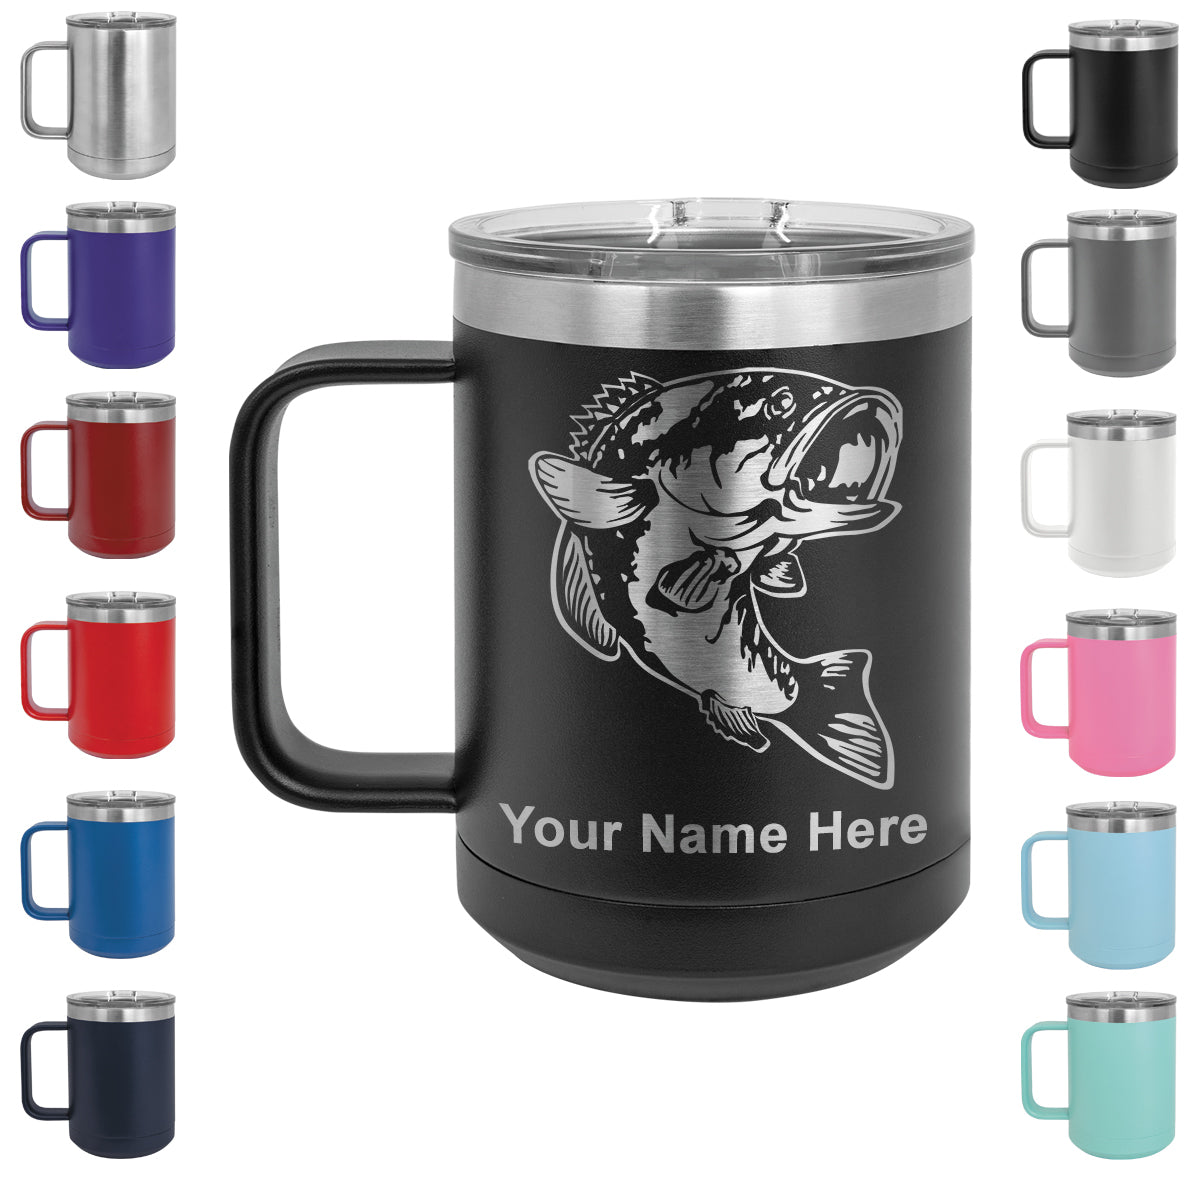 Personalized Tumblers Vacuum Insulated Travel Coffee Mugs